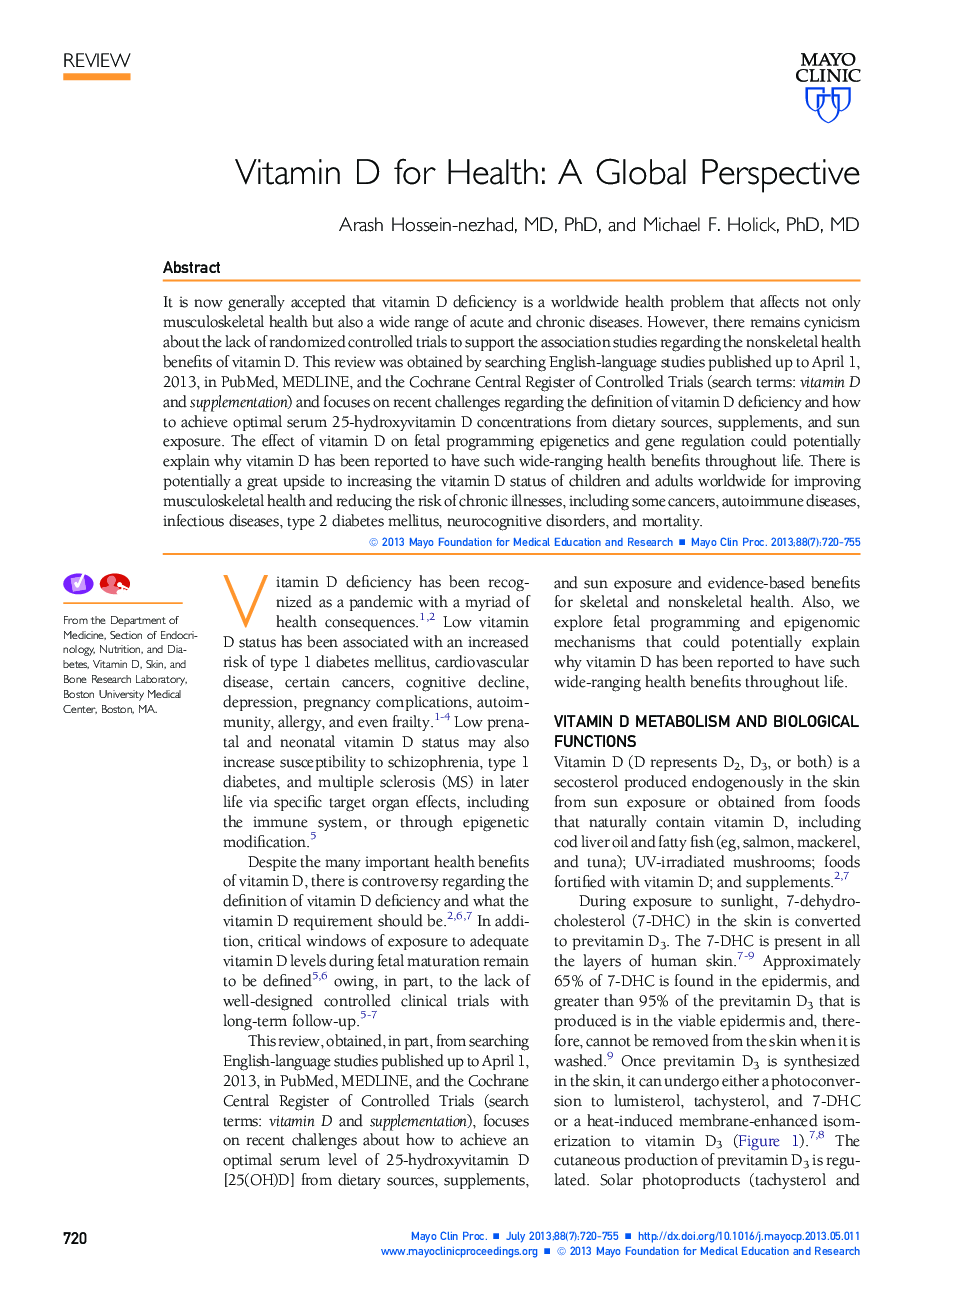 Vitamin D for Health: A Global Perspective